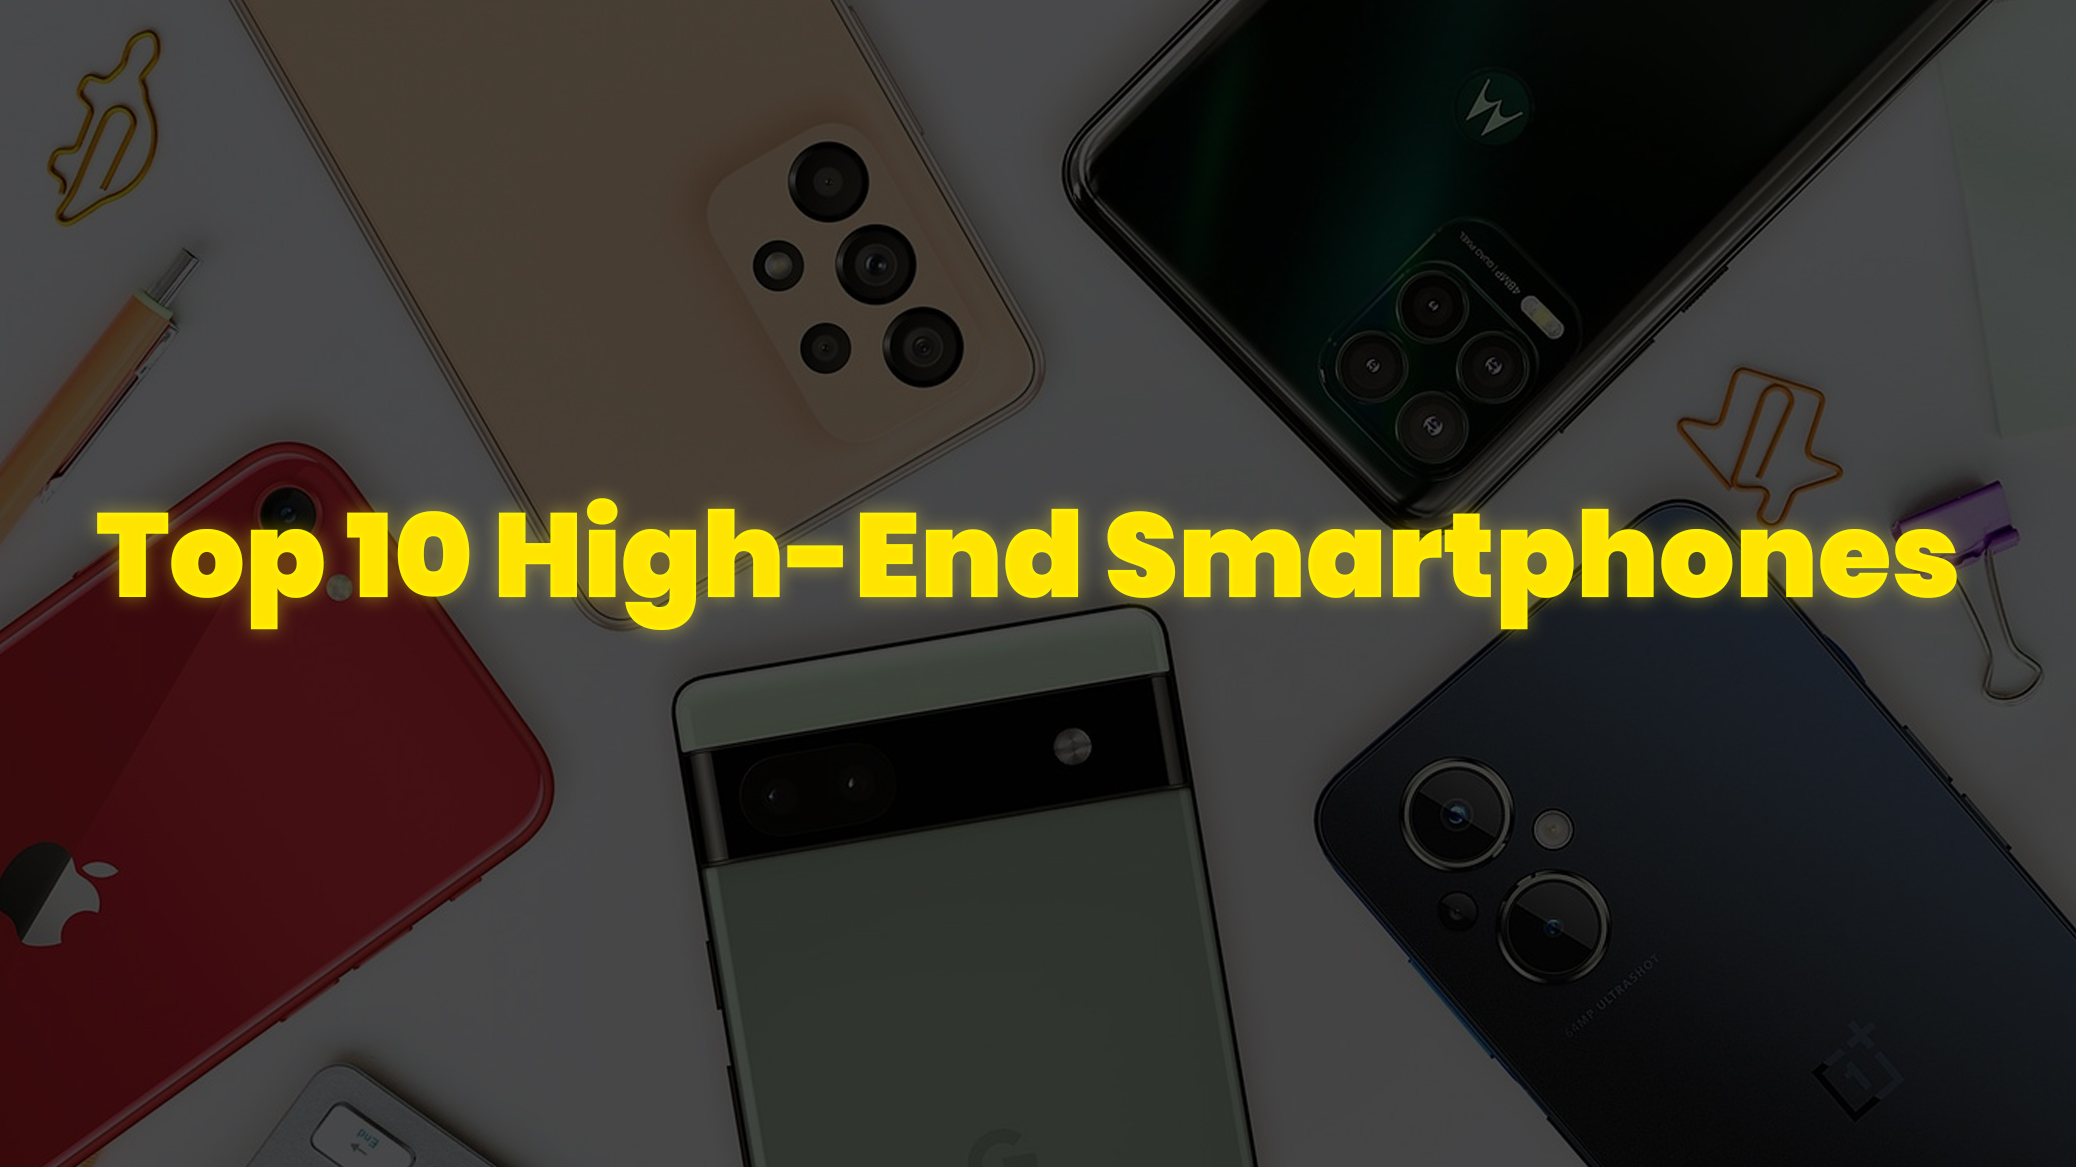 Top 10 High-End Smartphones of the Year